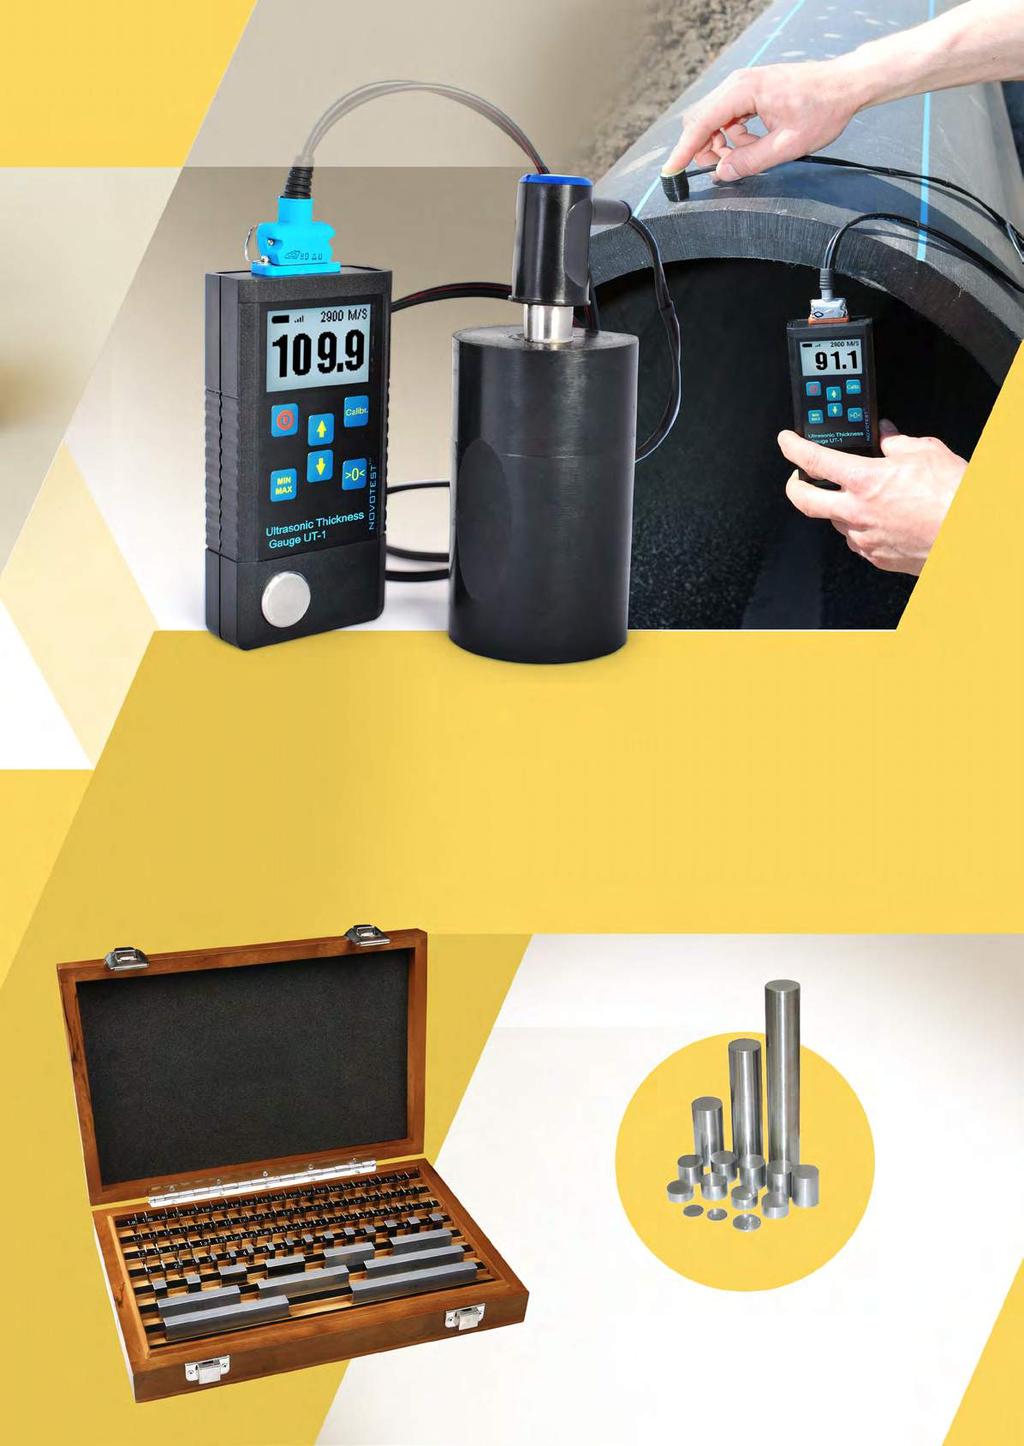 Ultrasonic Thickness Gauge NOVOTEST UT-1 Portable Ultrasonic Thickness Gauge NOVOTEST UT-1 is designed for rapid non-destructive testing of thickness of objects and constructions made of different